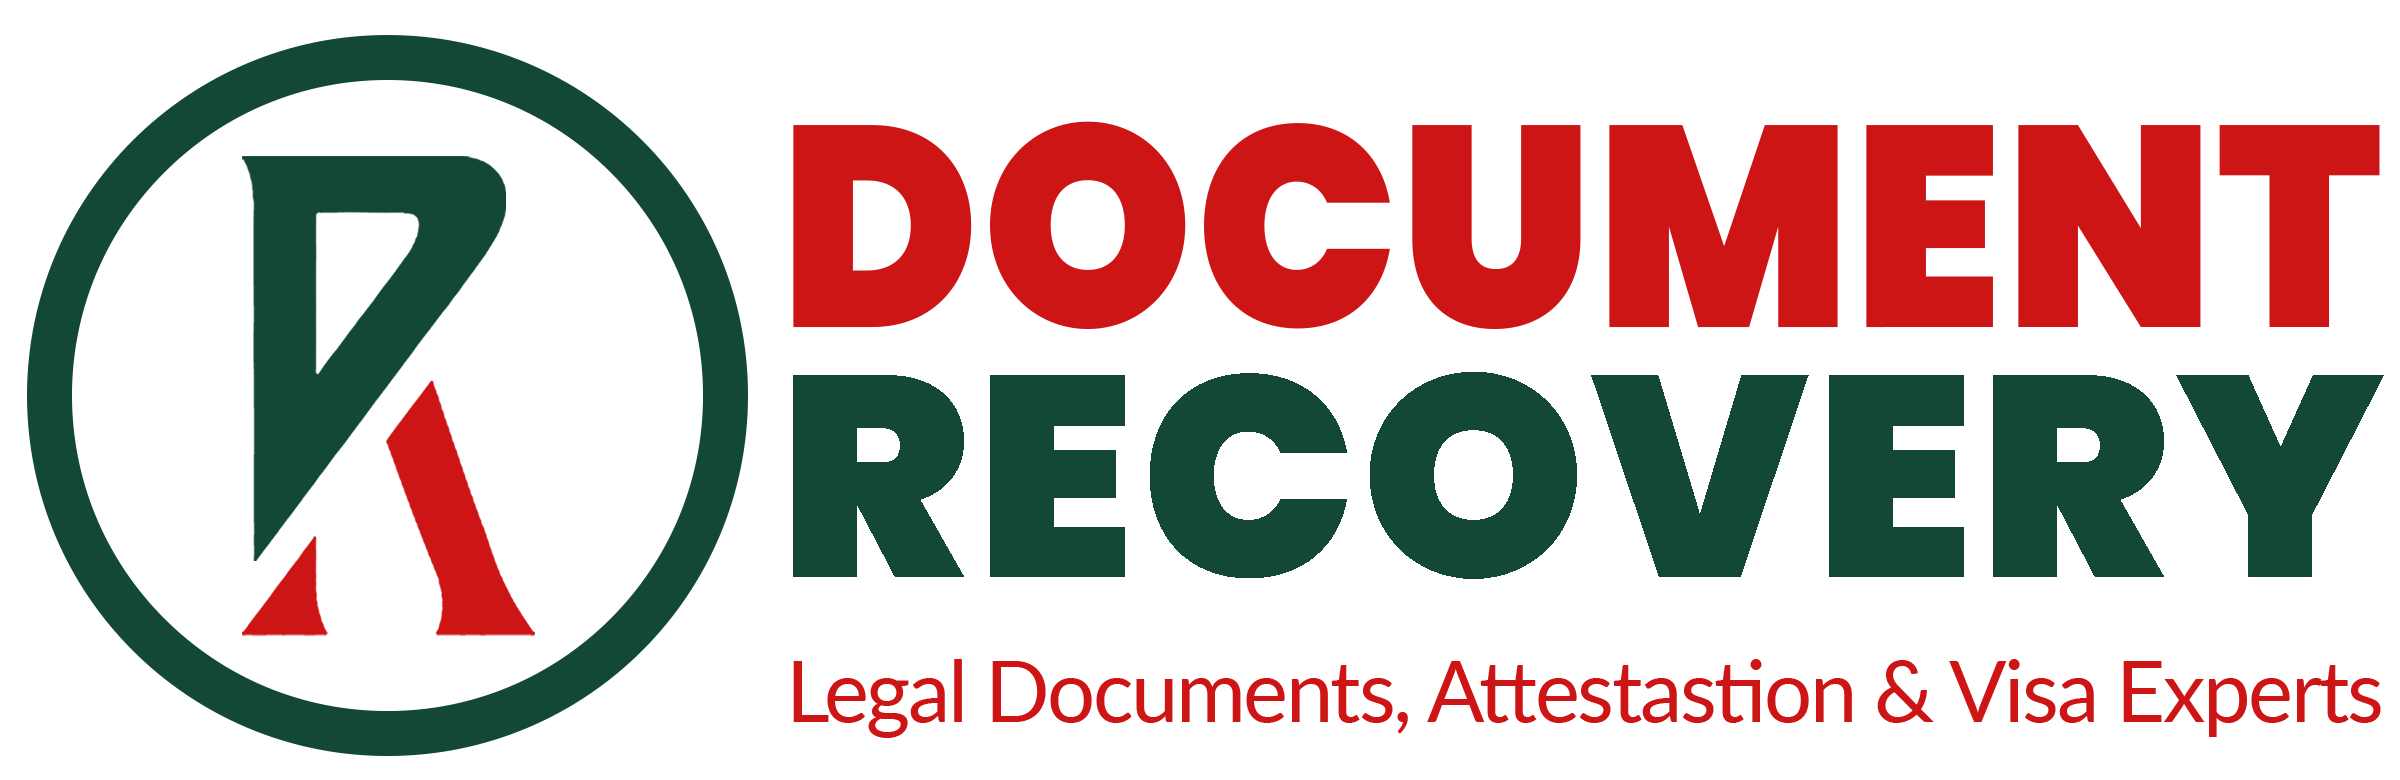 Document Recovery Worldwide